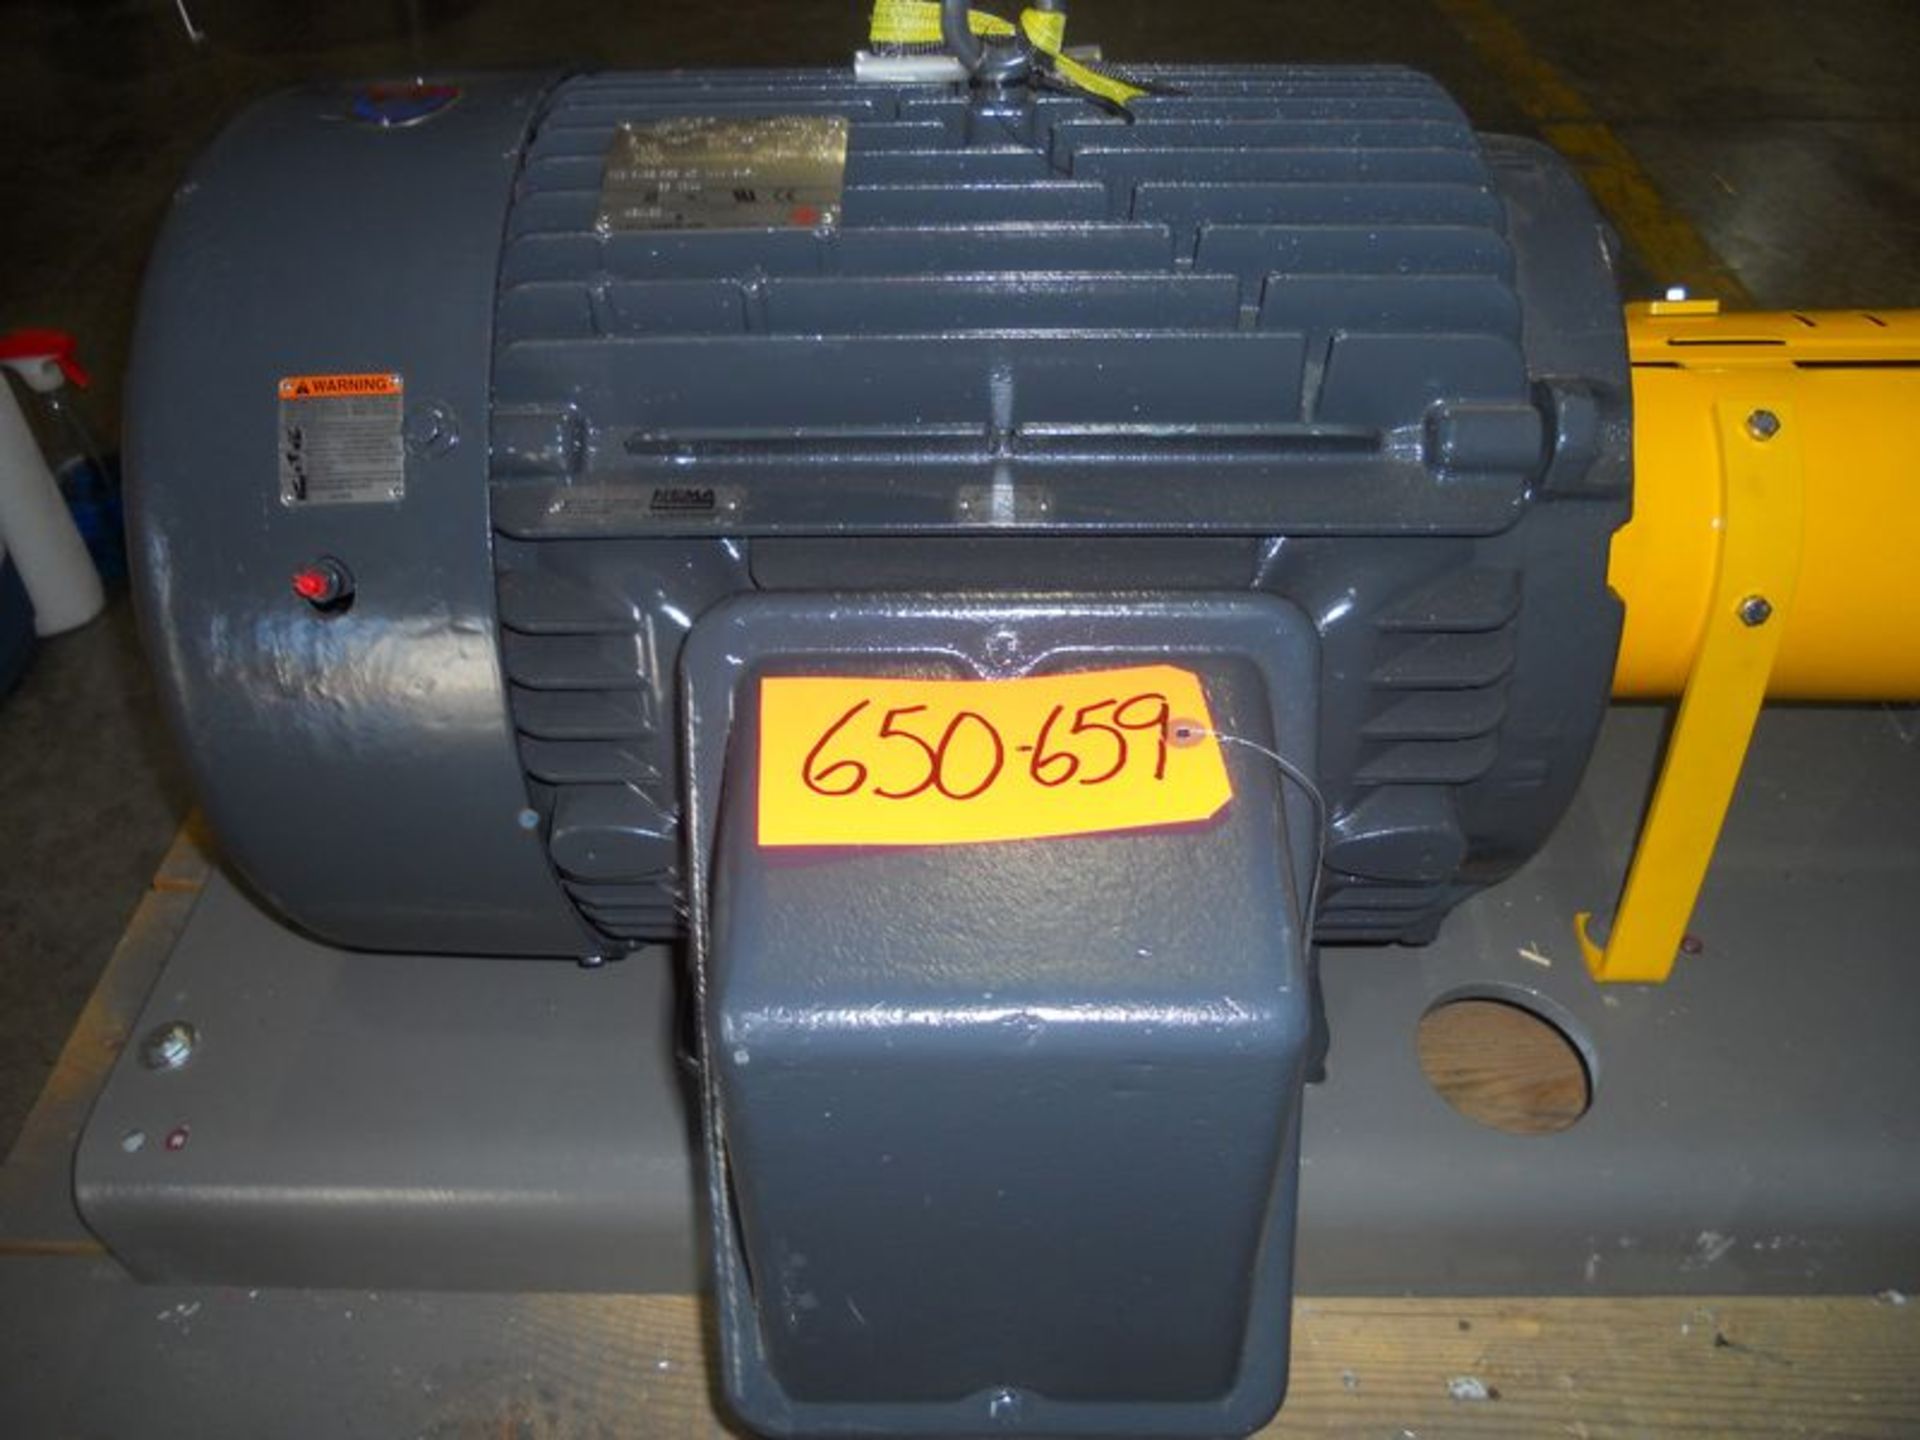 FlowServe MK3 STD centrifugal pump, S/N 0108-3590-E, 4" X 3", 60 HP, MDP 285 psi @ 100 DegF, Size - Image 4 of 6